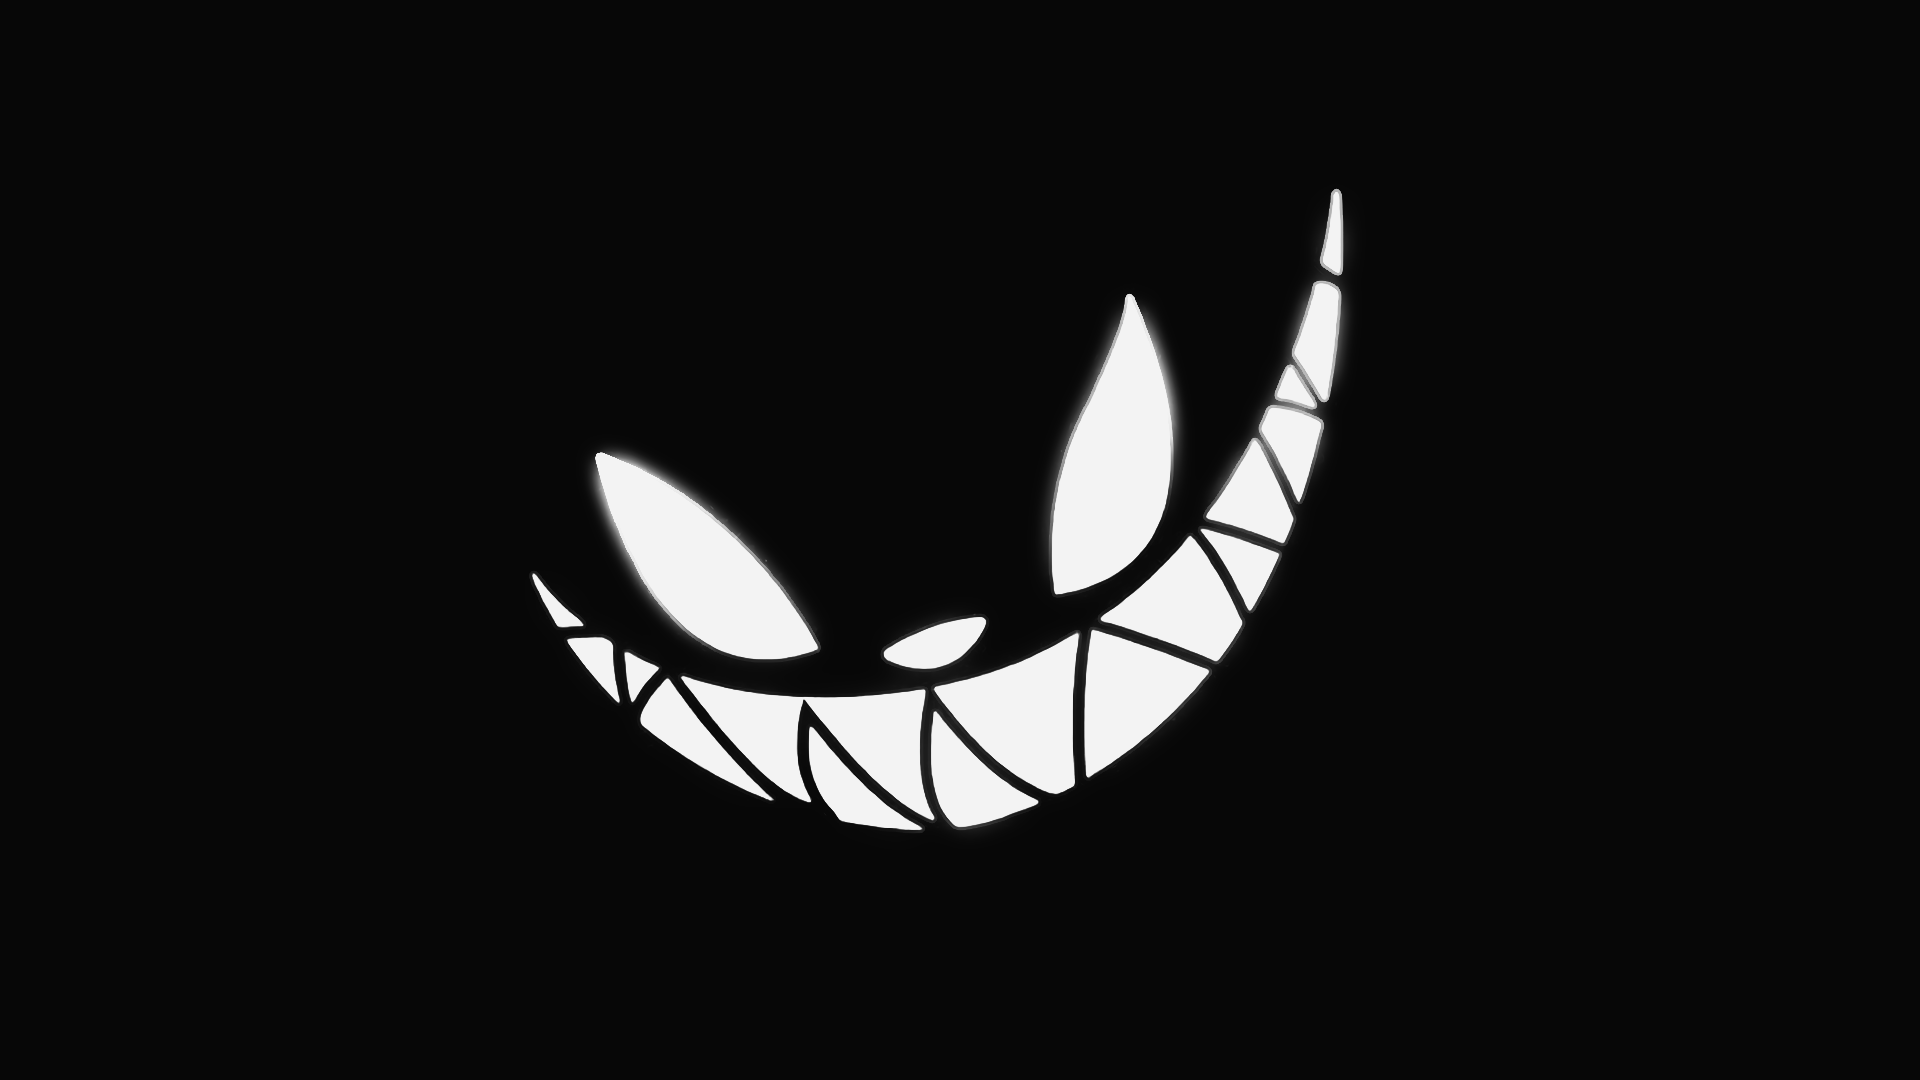 Download wallpaper 800x1200 monster art smile spooky iphone 4s4 for  parallax hd background